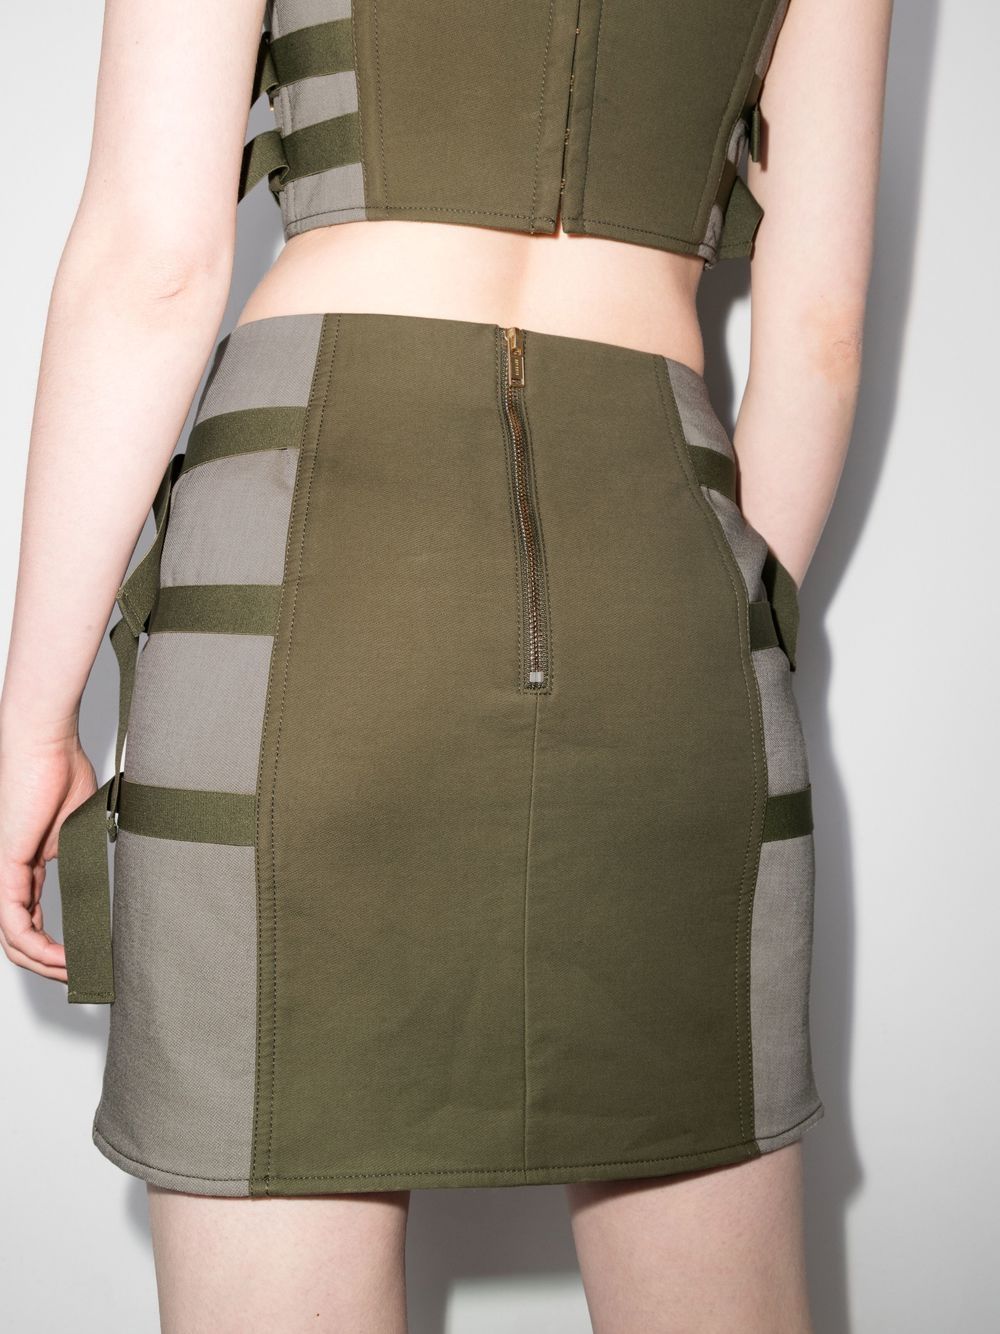 dion lee lace-up mini skirt - green